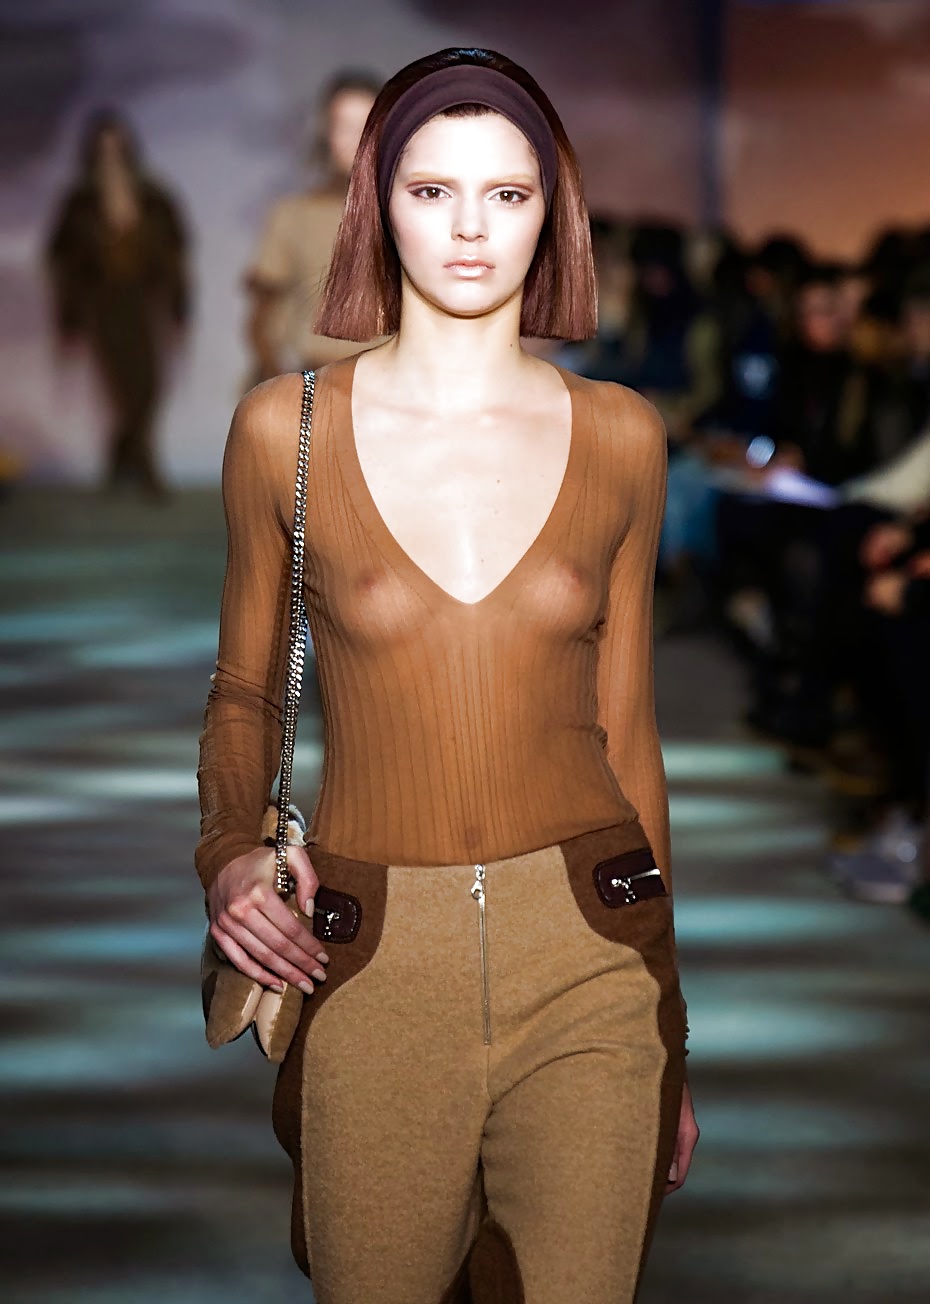 Kendall Jenner showing off her boobs at Fashion Show In NY  #25306280